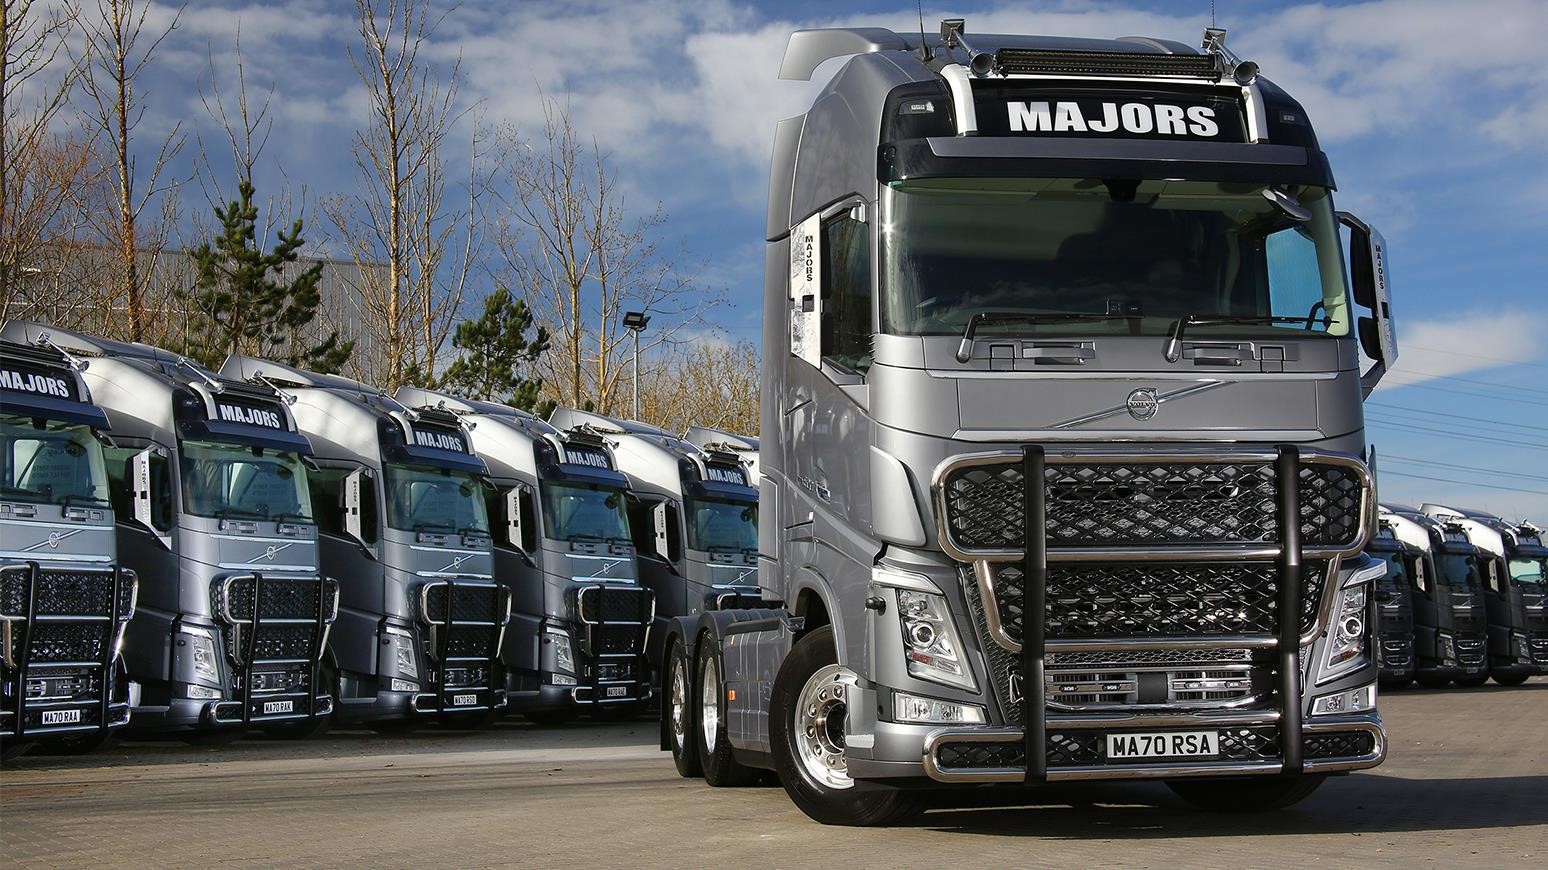 Majors Service Moves From Secondhand Volvos To 15 Brand-New FH Unlimited Edition Tractor Units With I-Save